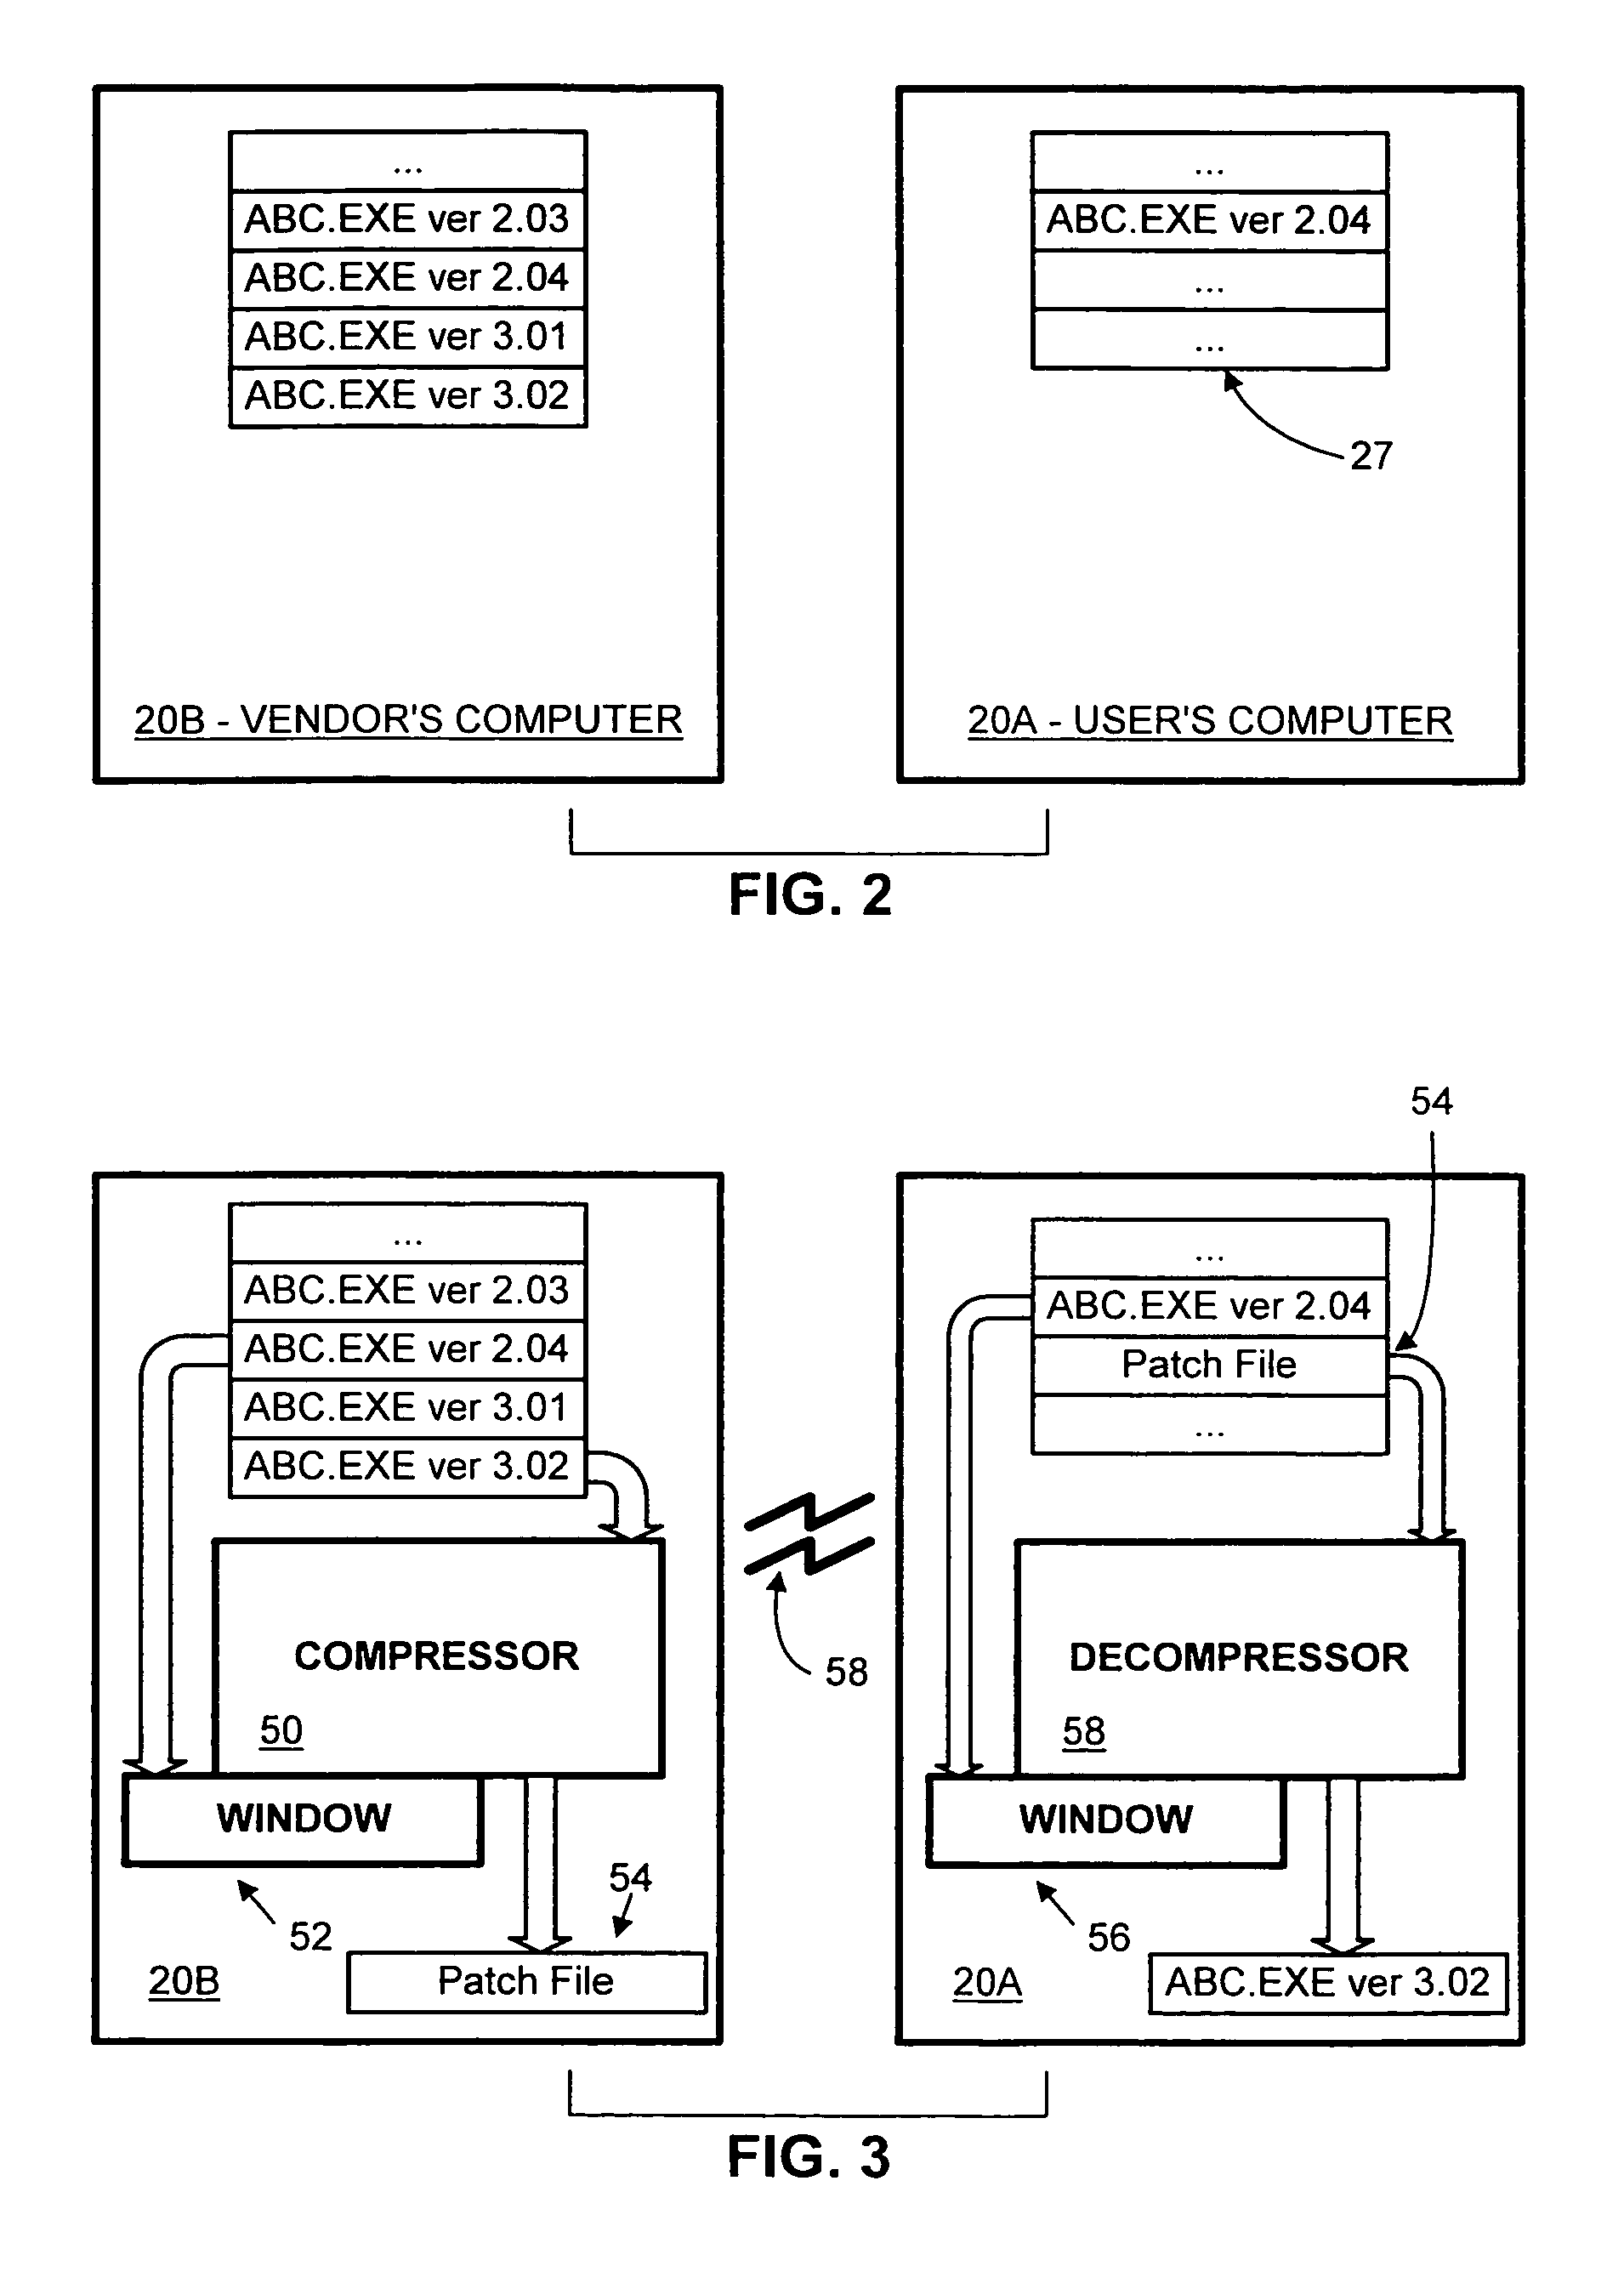 Method and system for updating software with smaller patch files